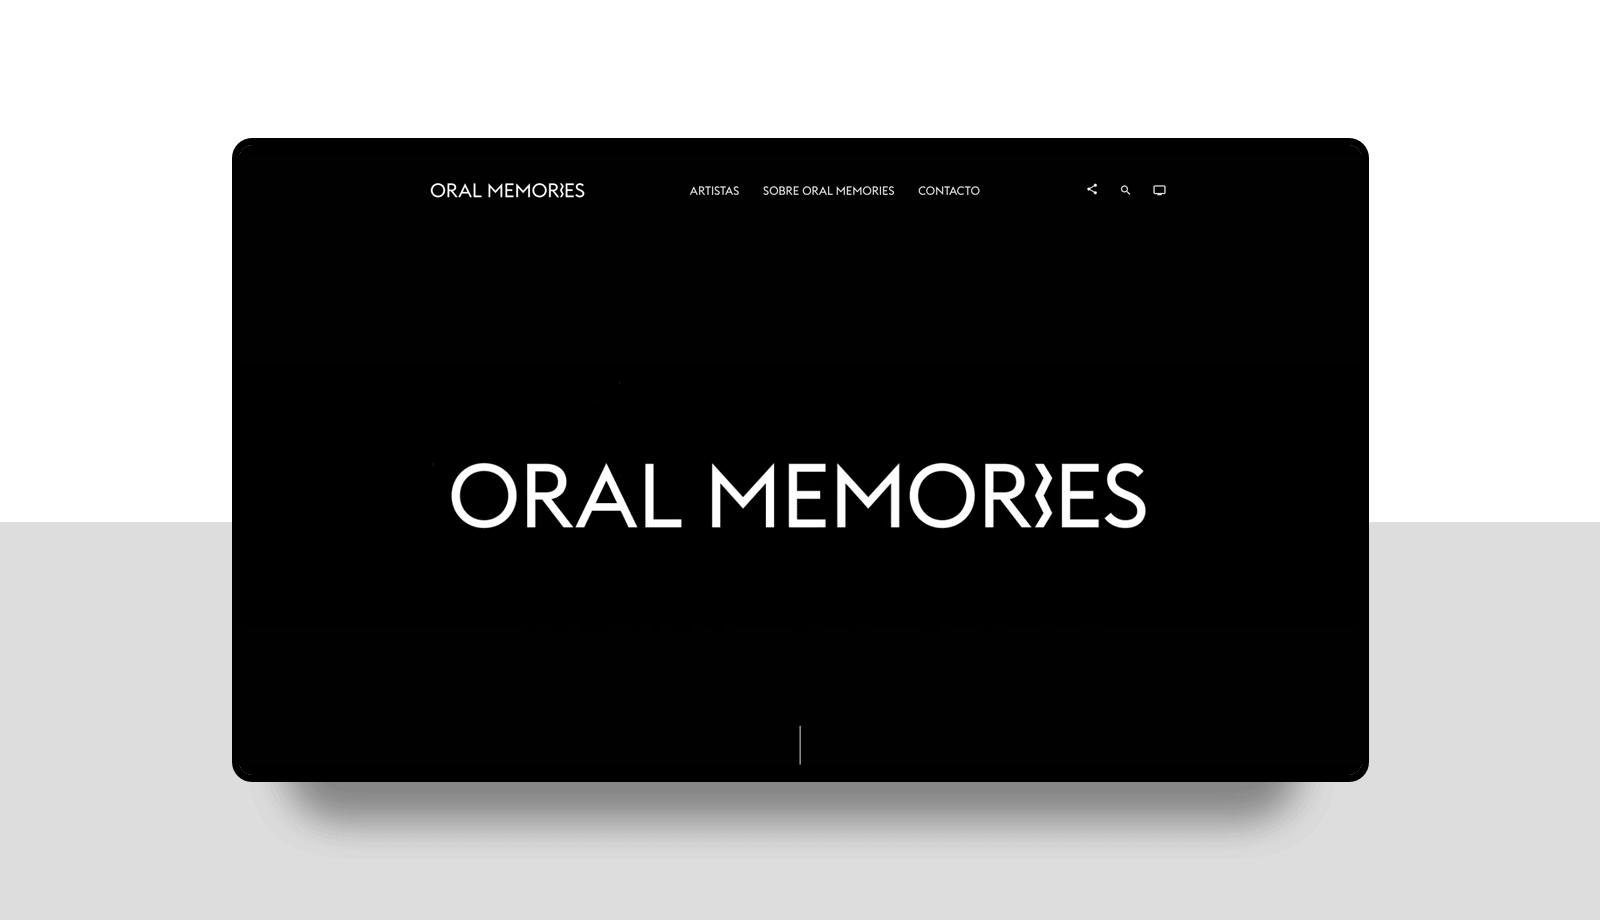 Oral Memories, a website of the Ministry of Culture for the promotion of art